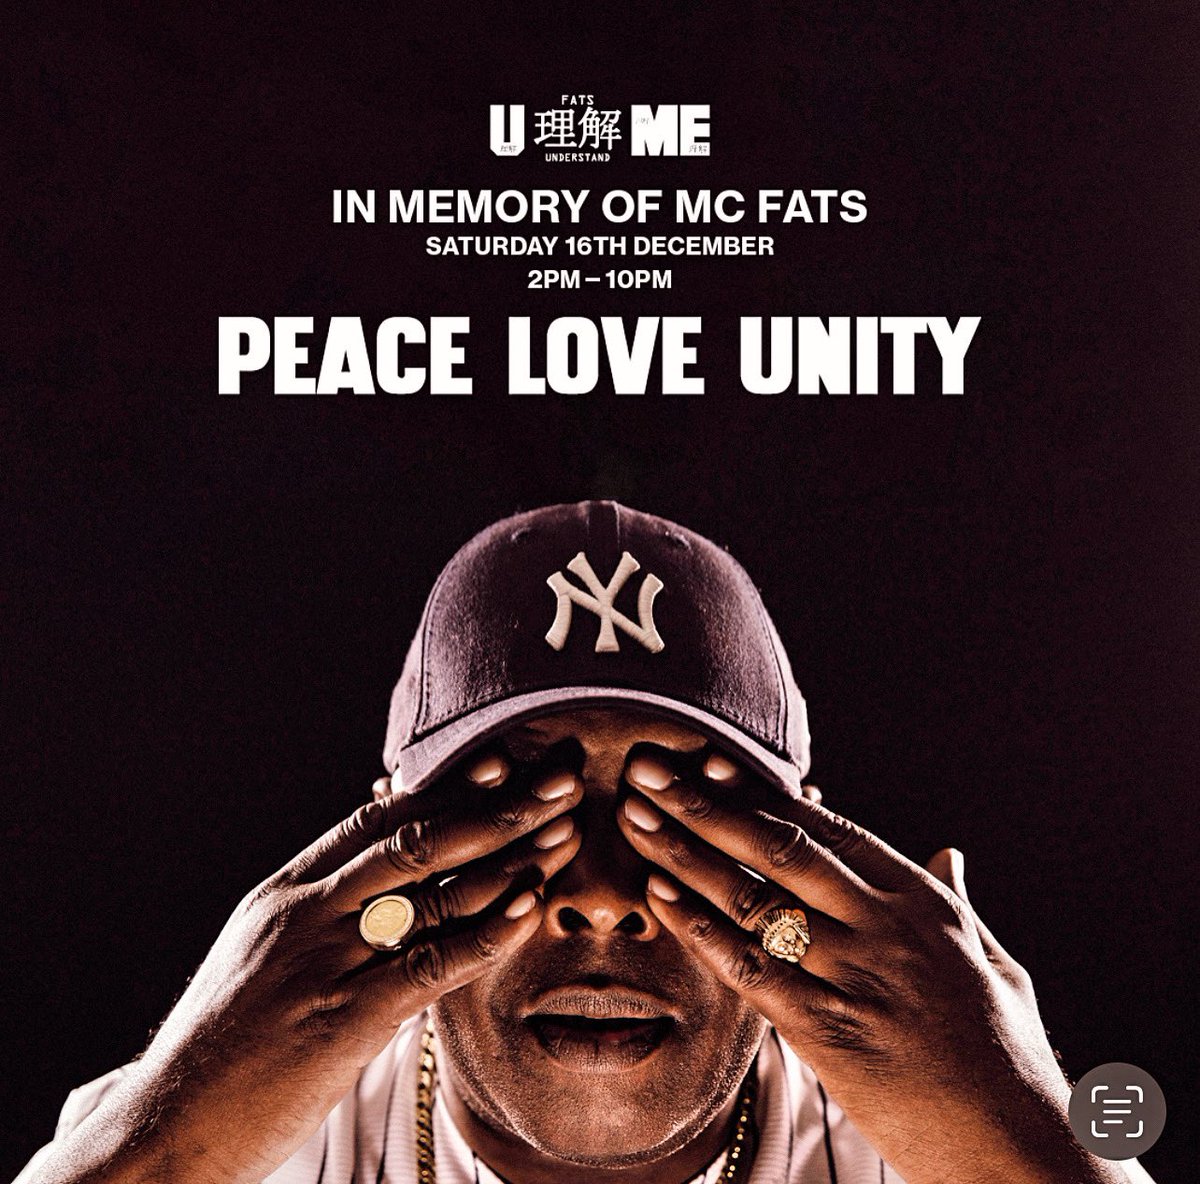 This Saturday: An unmissable memorial event to celebrate @mcsingingfats’ life and 4 decades of musical contributions across the global electronic music scene 💛💛 PEACE, LOVE & UNITY 🙏 Tickets: ra.co/events/1810854